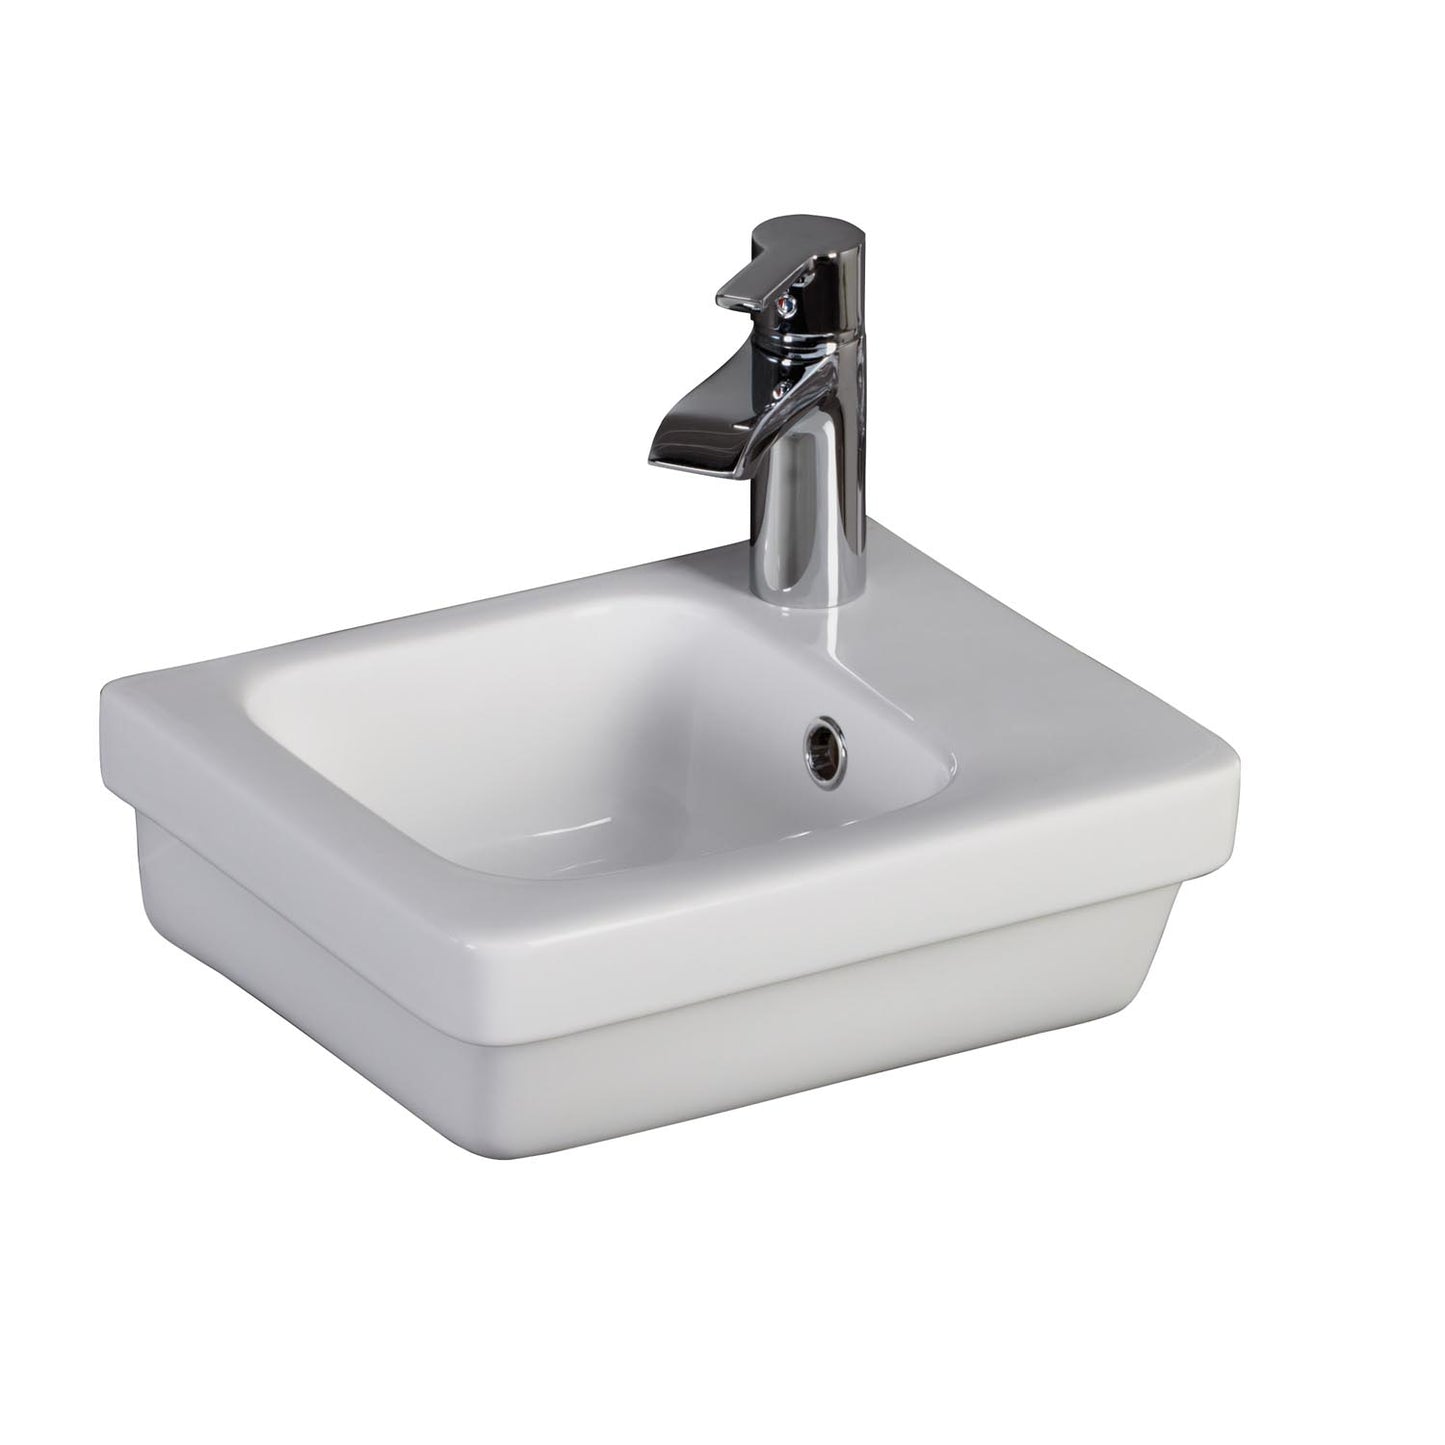 Resort 360 Wall Hung Bathroom Sink White with 1 Faucet Hole